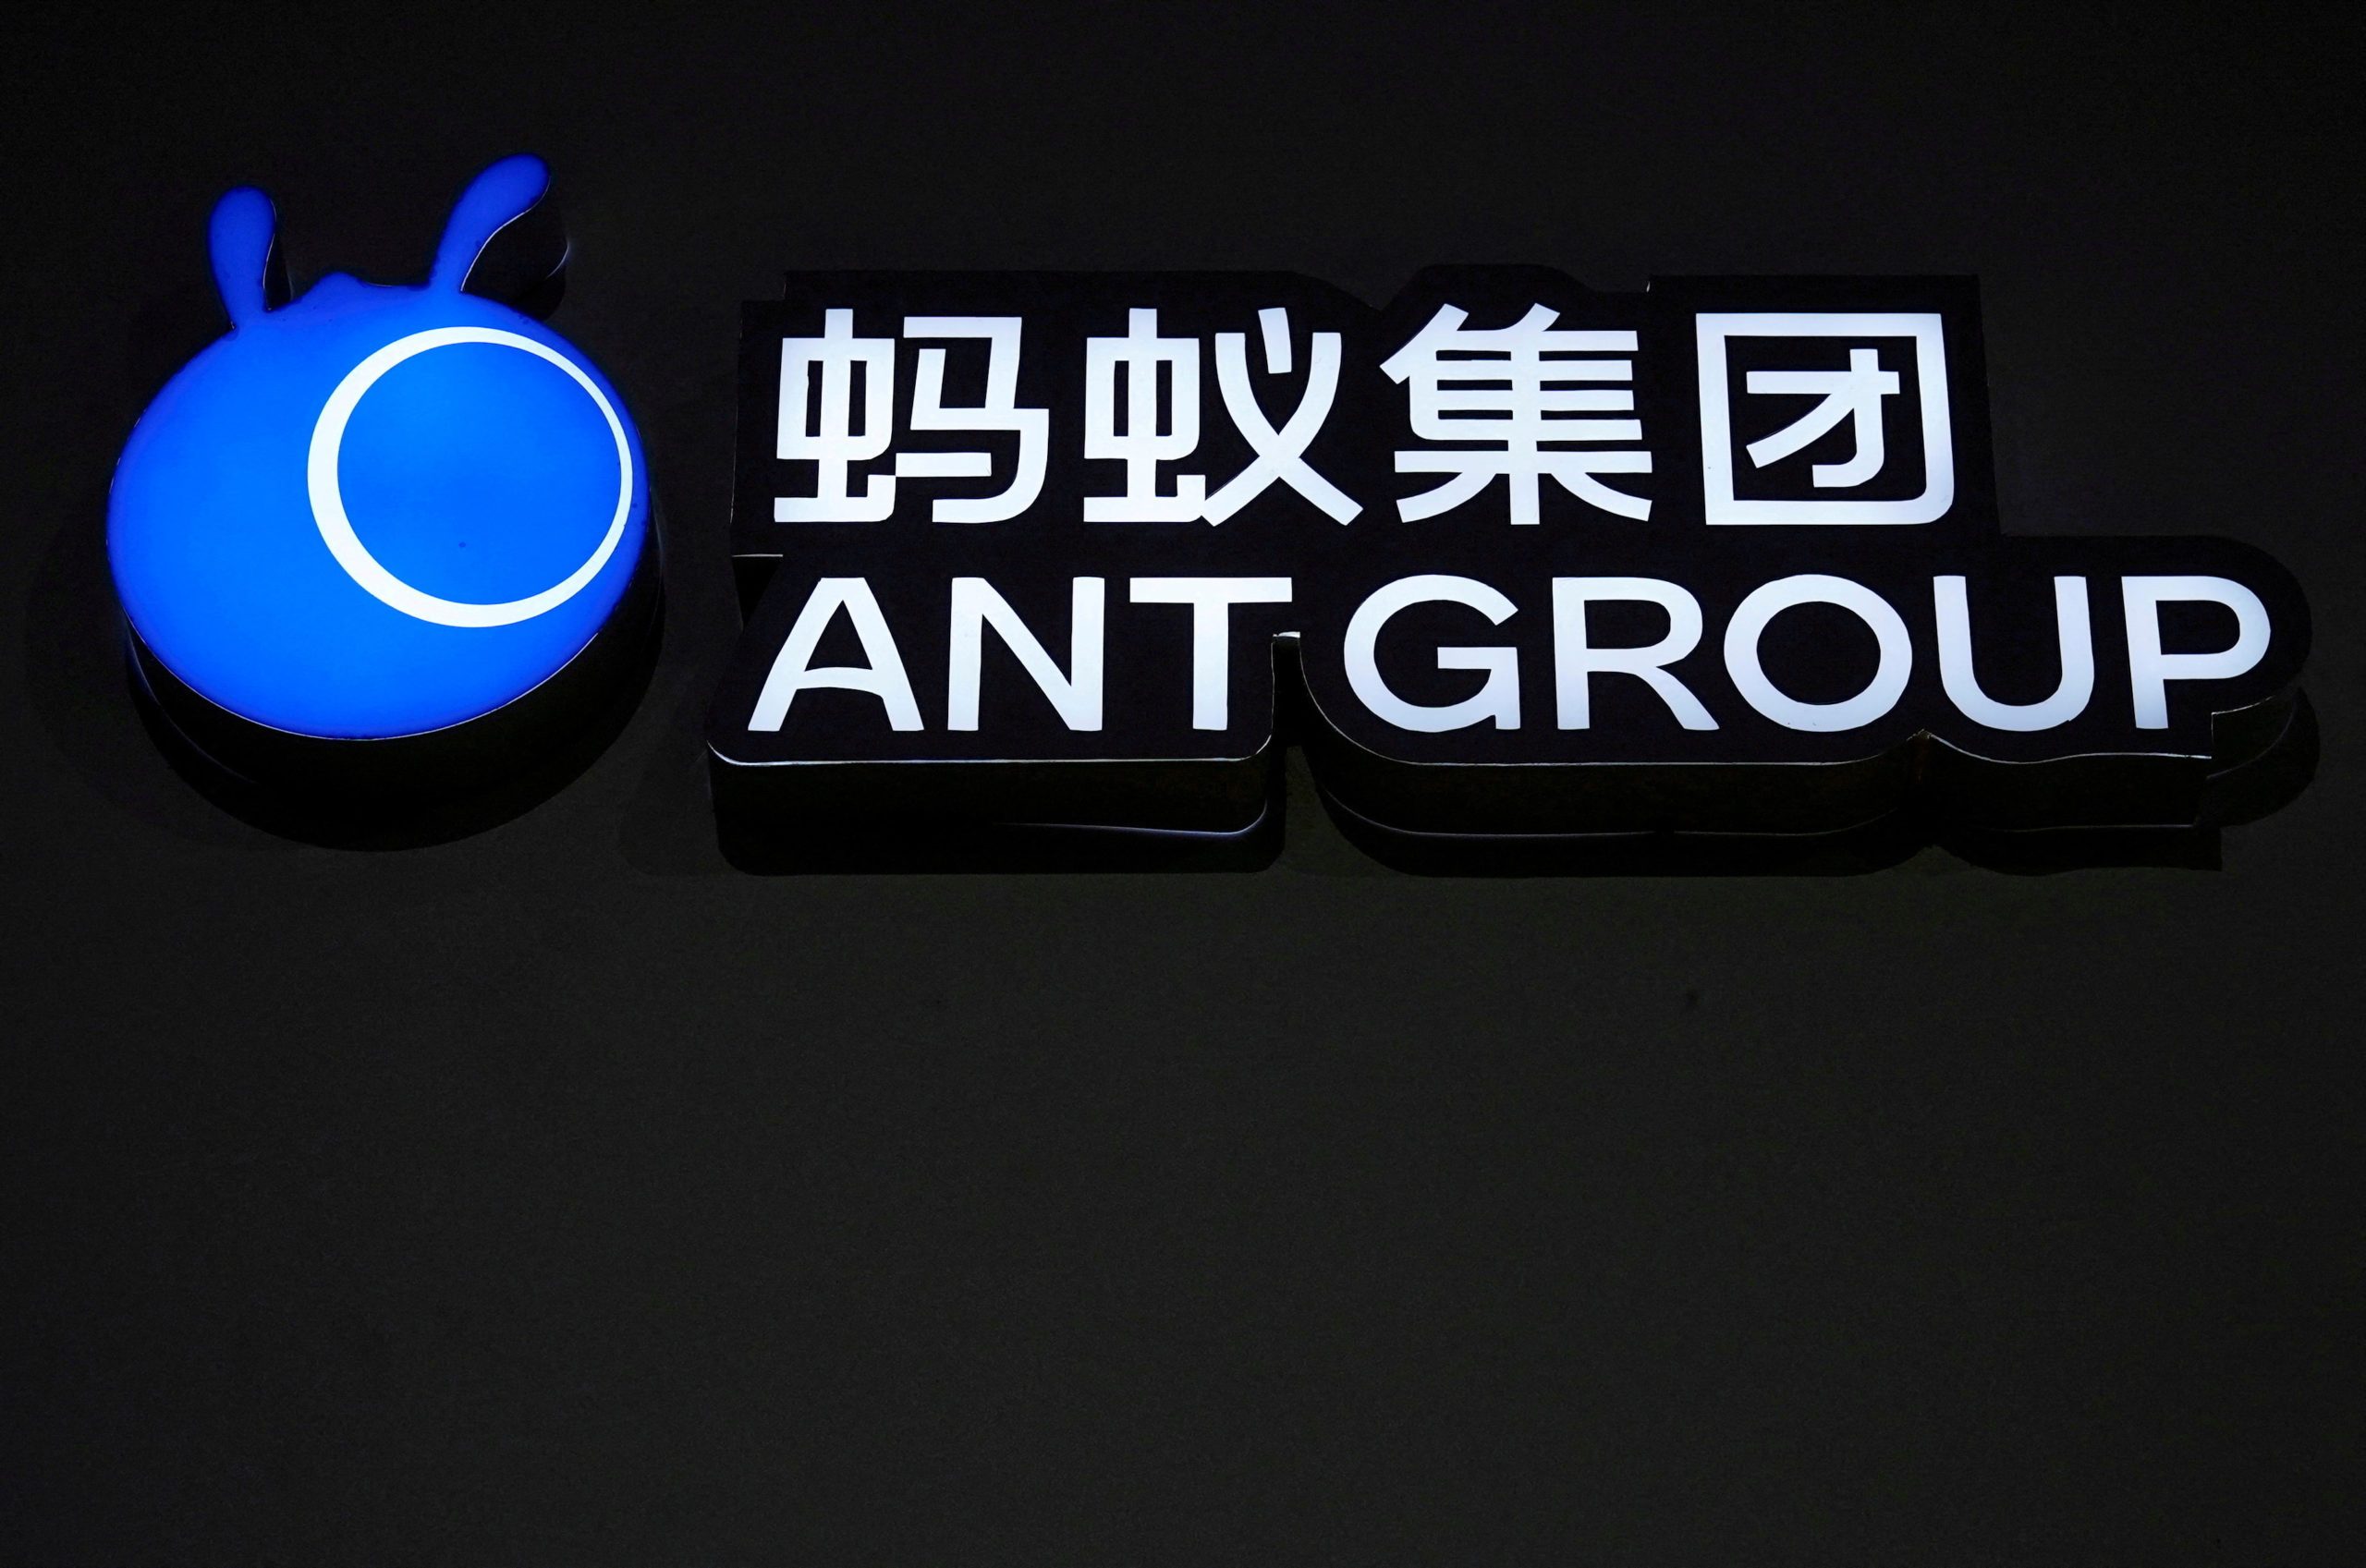 China expected to lower fine on Ant Group to about $700m